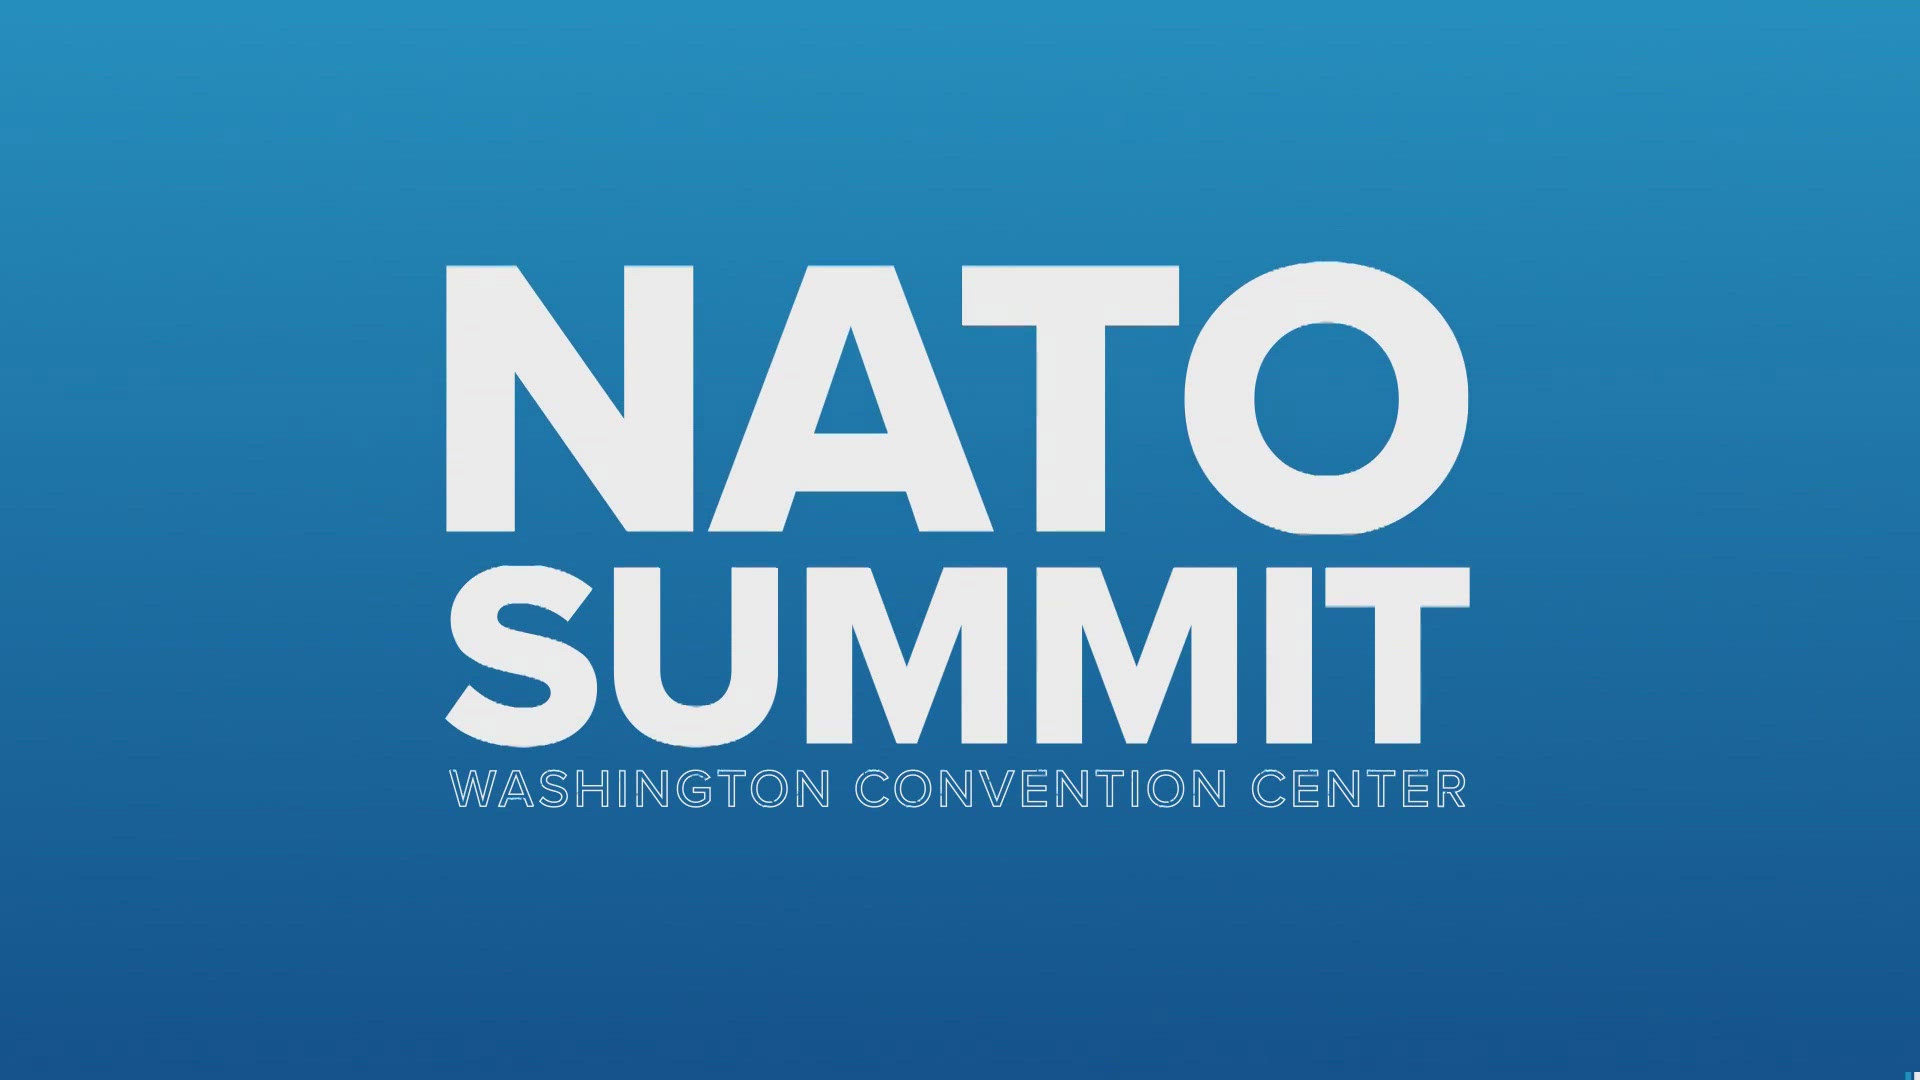 The 55th NATO Summit will take place in our nation's capital on July 9–11. Here is a summary of how your commute might be affected.